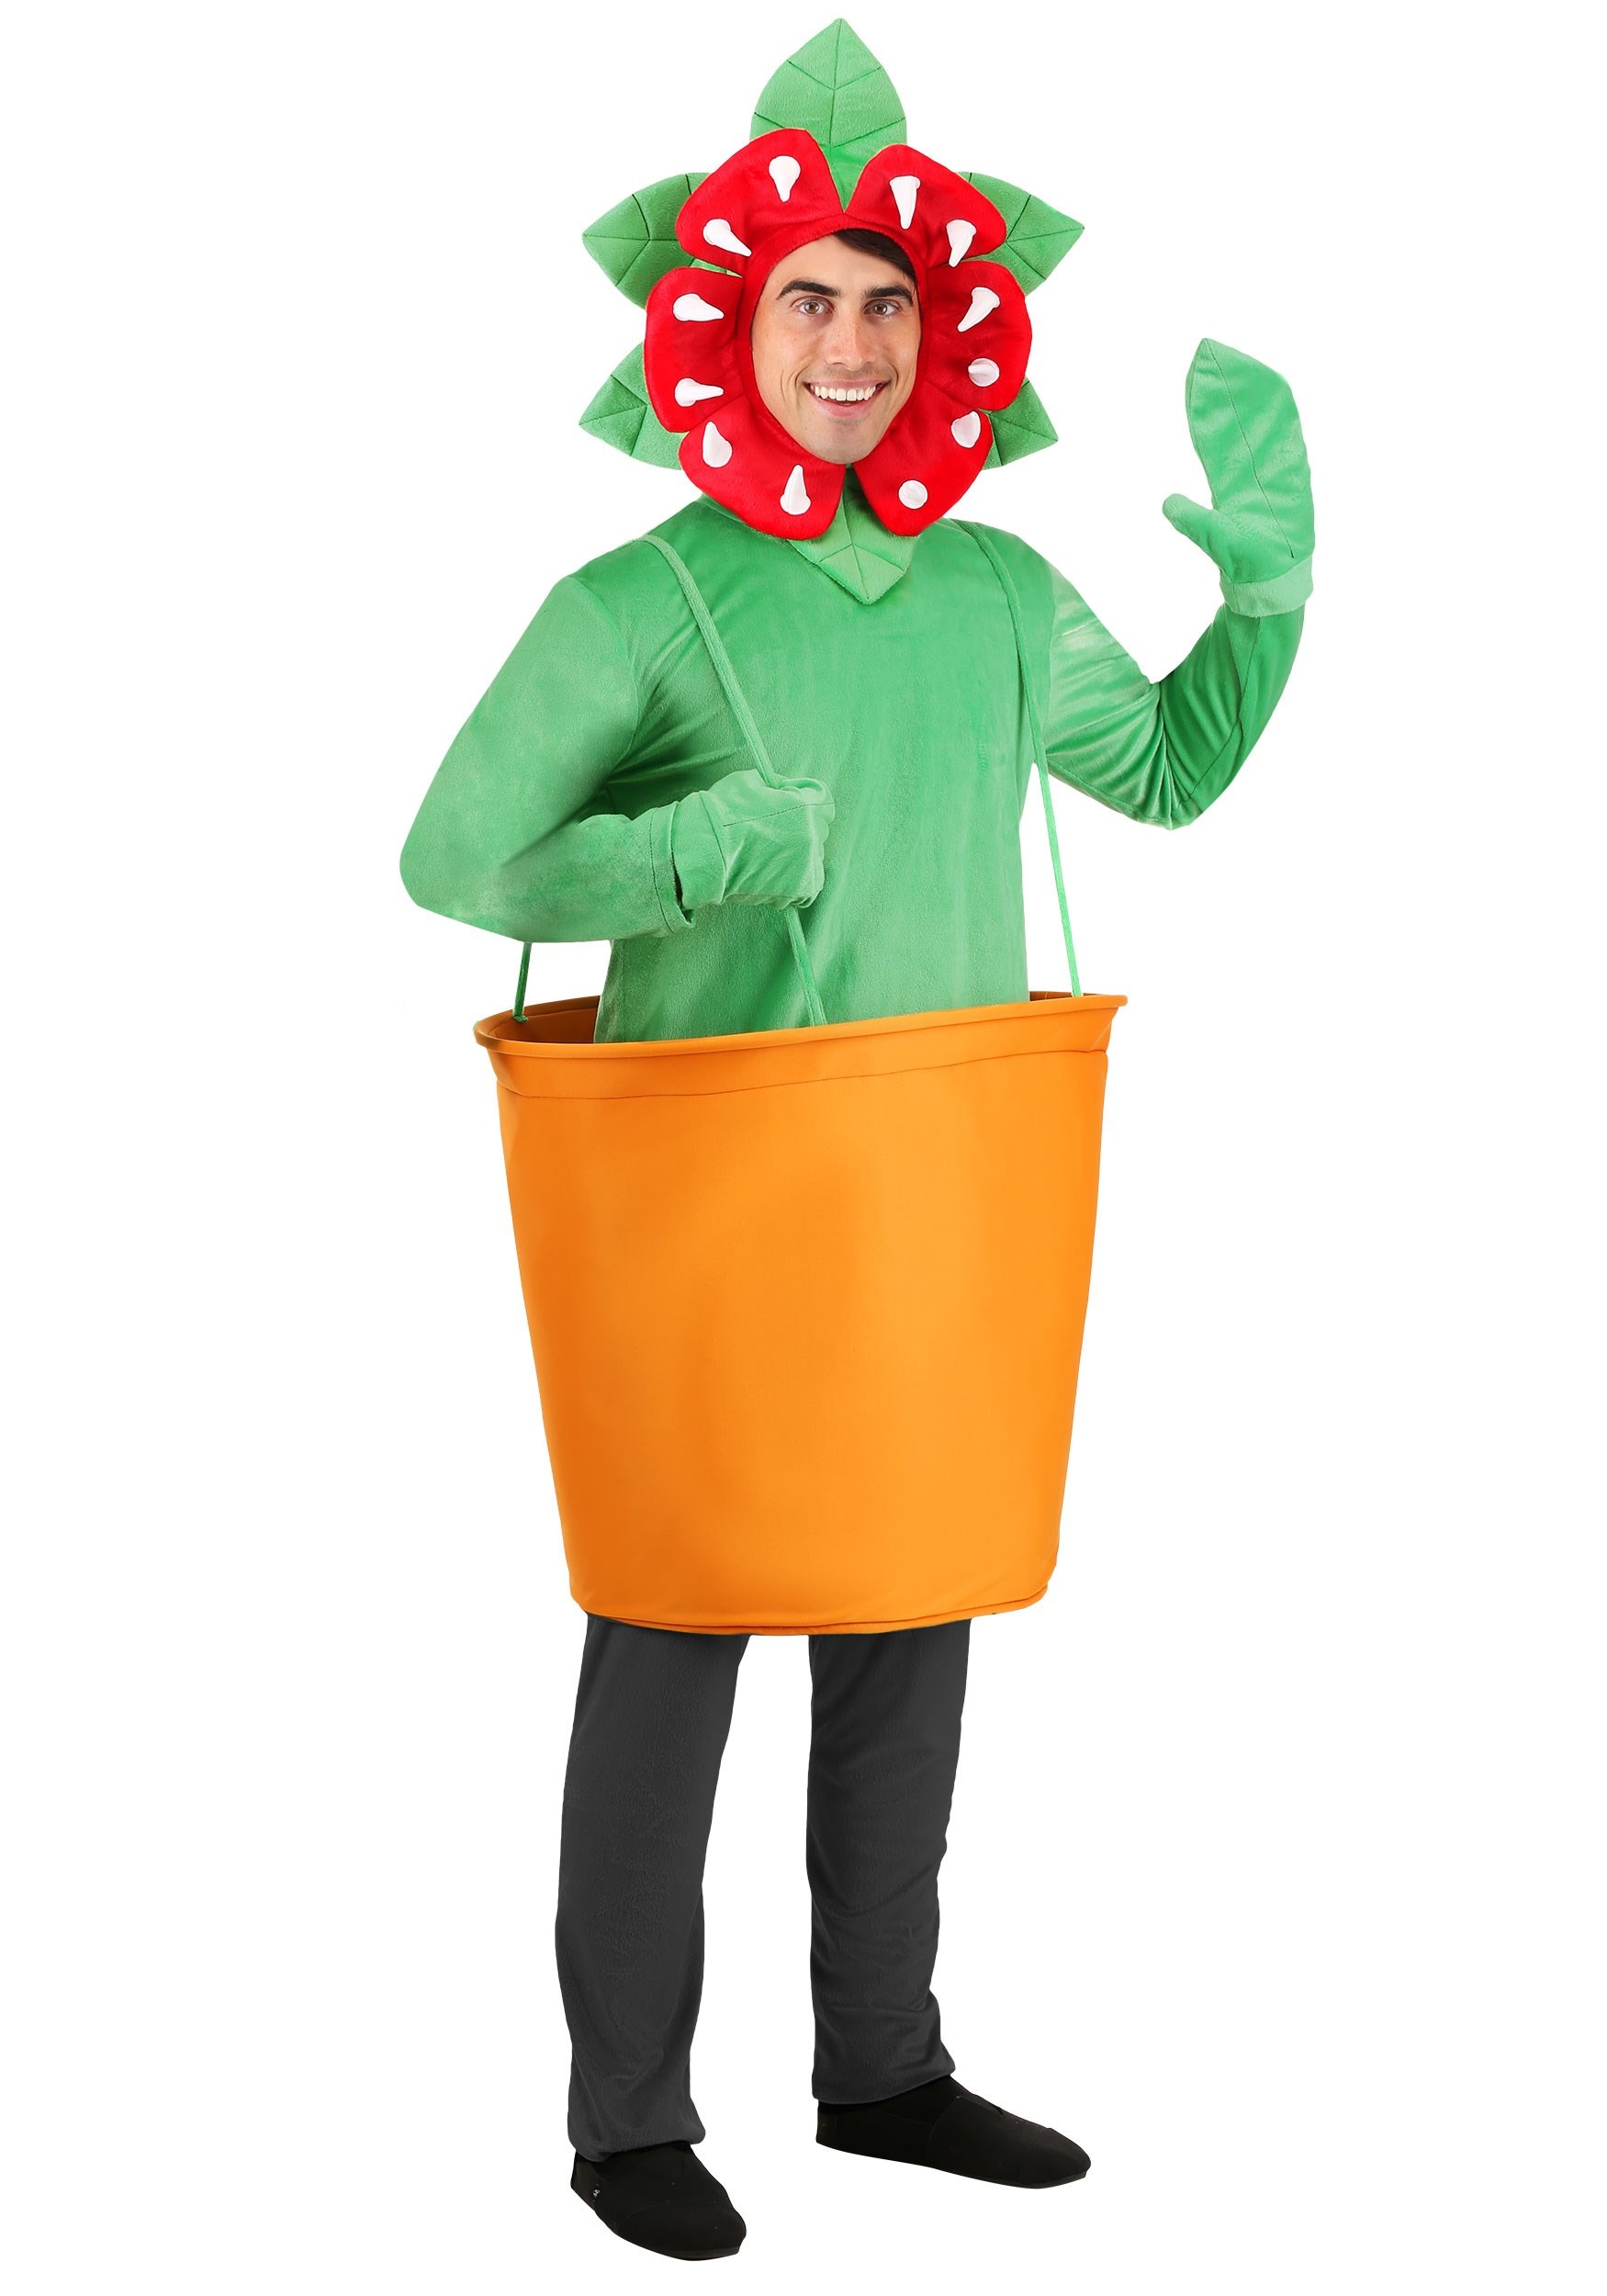 Image of Man-Eating Venus Fly Trap Costume for Adults ID FUN0900AD-ST